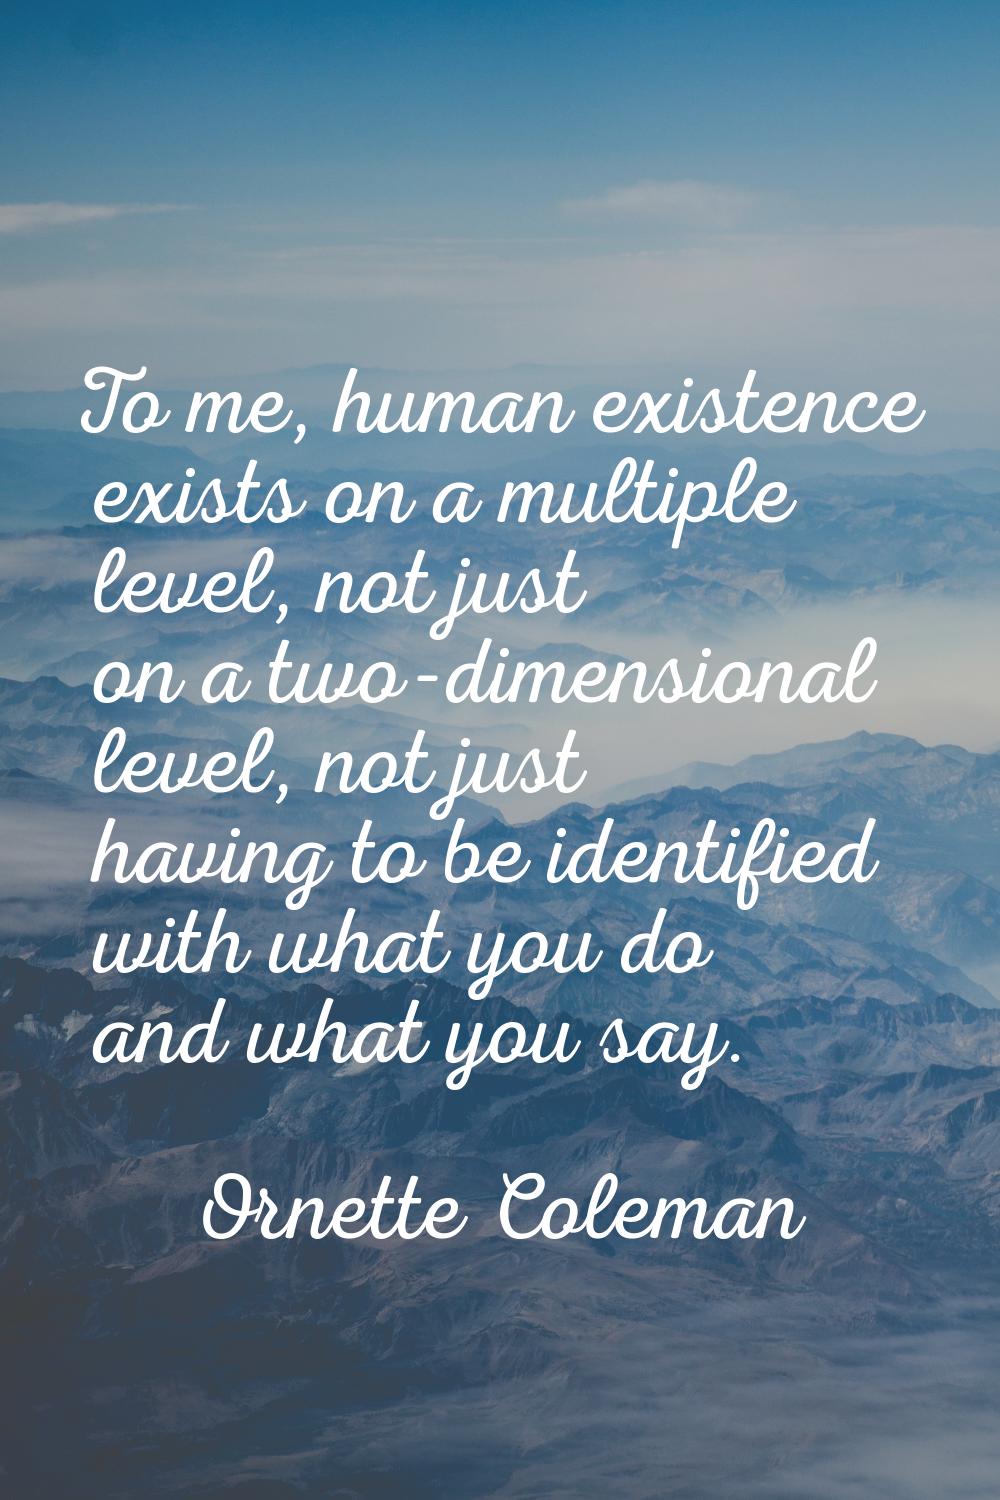 To me, human existence exists on a multiple level, not just on a two-dimensional level, not just ha